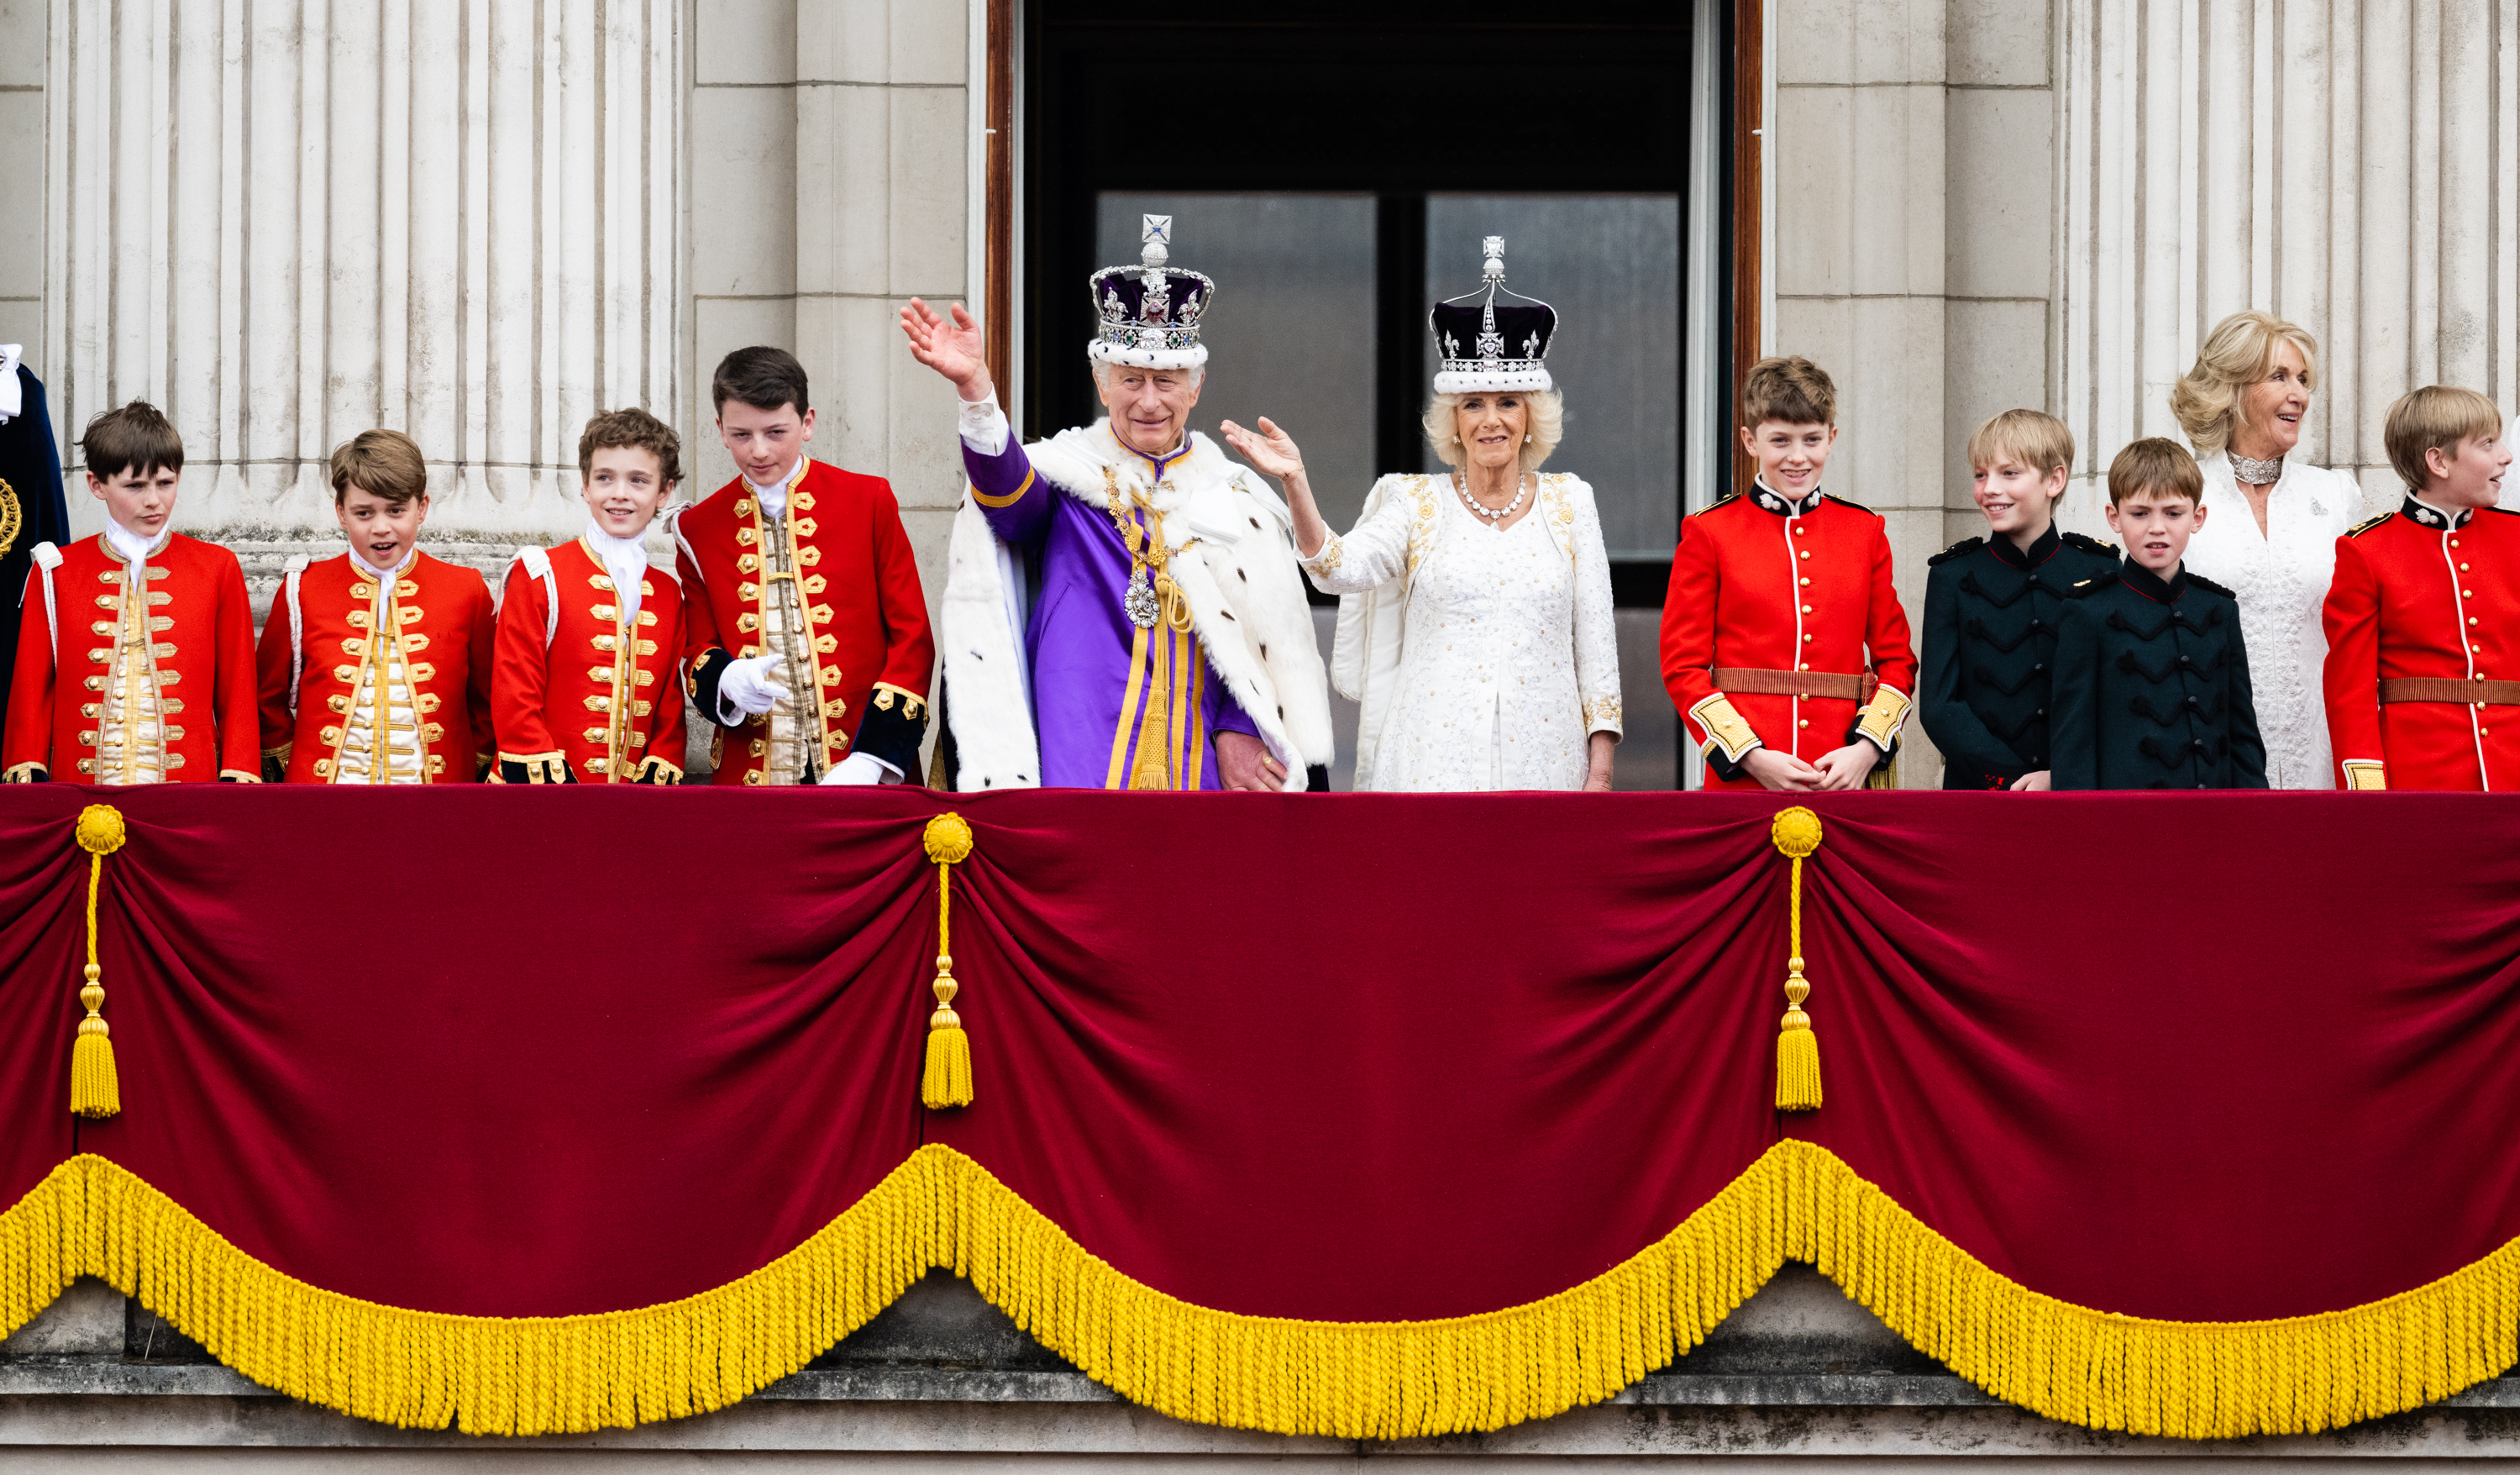 Lord Oliver Cholmondeley, Prince George of Wales, Nicholas Barclay, Ralph Tollemache, King Charles III, Queen Camilla, Freddy Parker Bowles, Louis Lopes, Annabel Elliot, and Gus Lopes at the Buckingham Palace following the Coronation service in London, England, on May 6, 2023. | Source: Getty Images